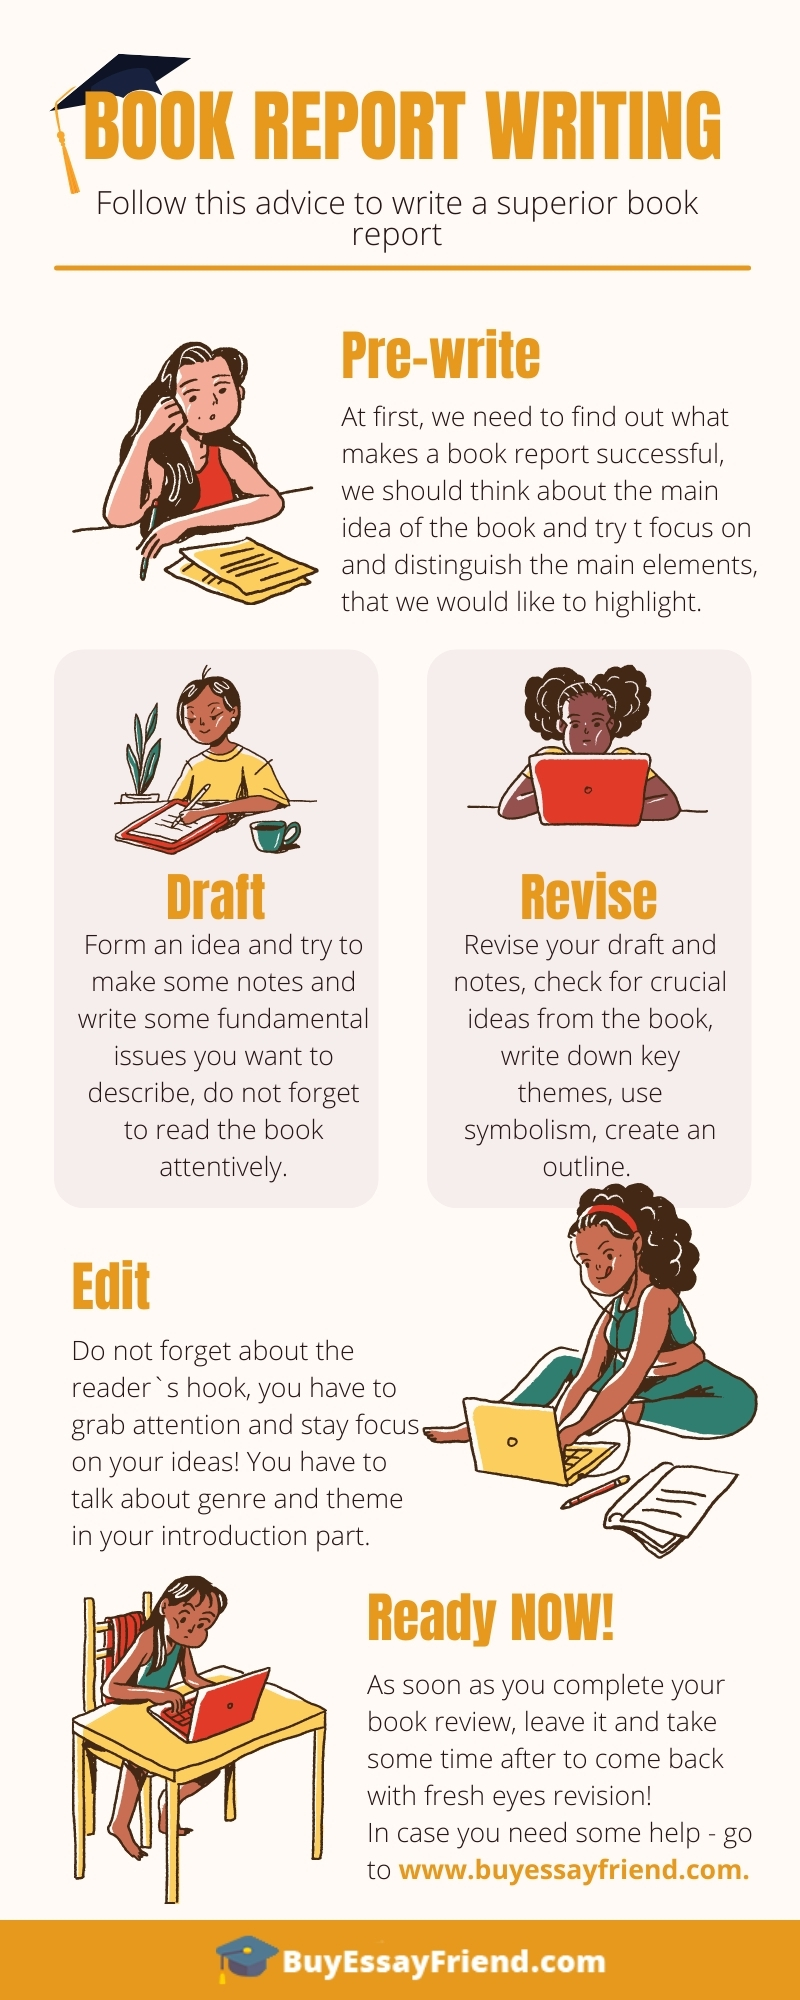 Infographic on Wrriting a Superior Book Review